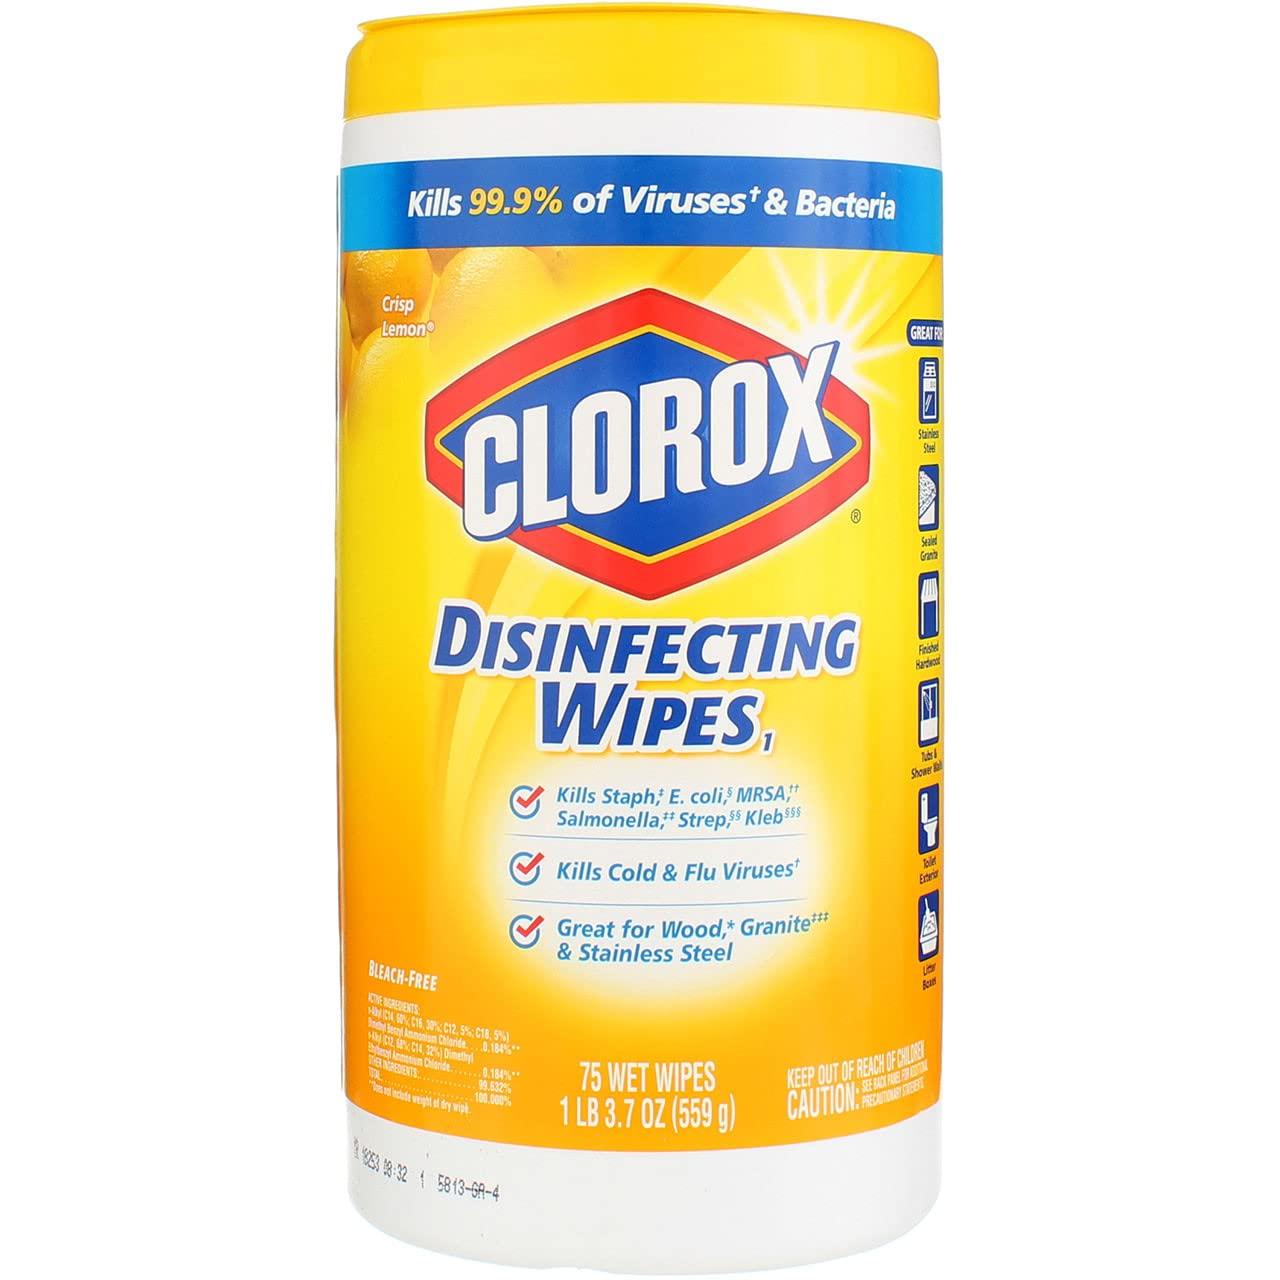 Clorox Disinfecting Wipes 75 Count for $2.50